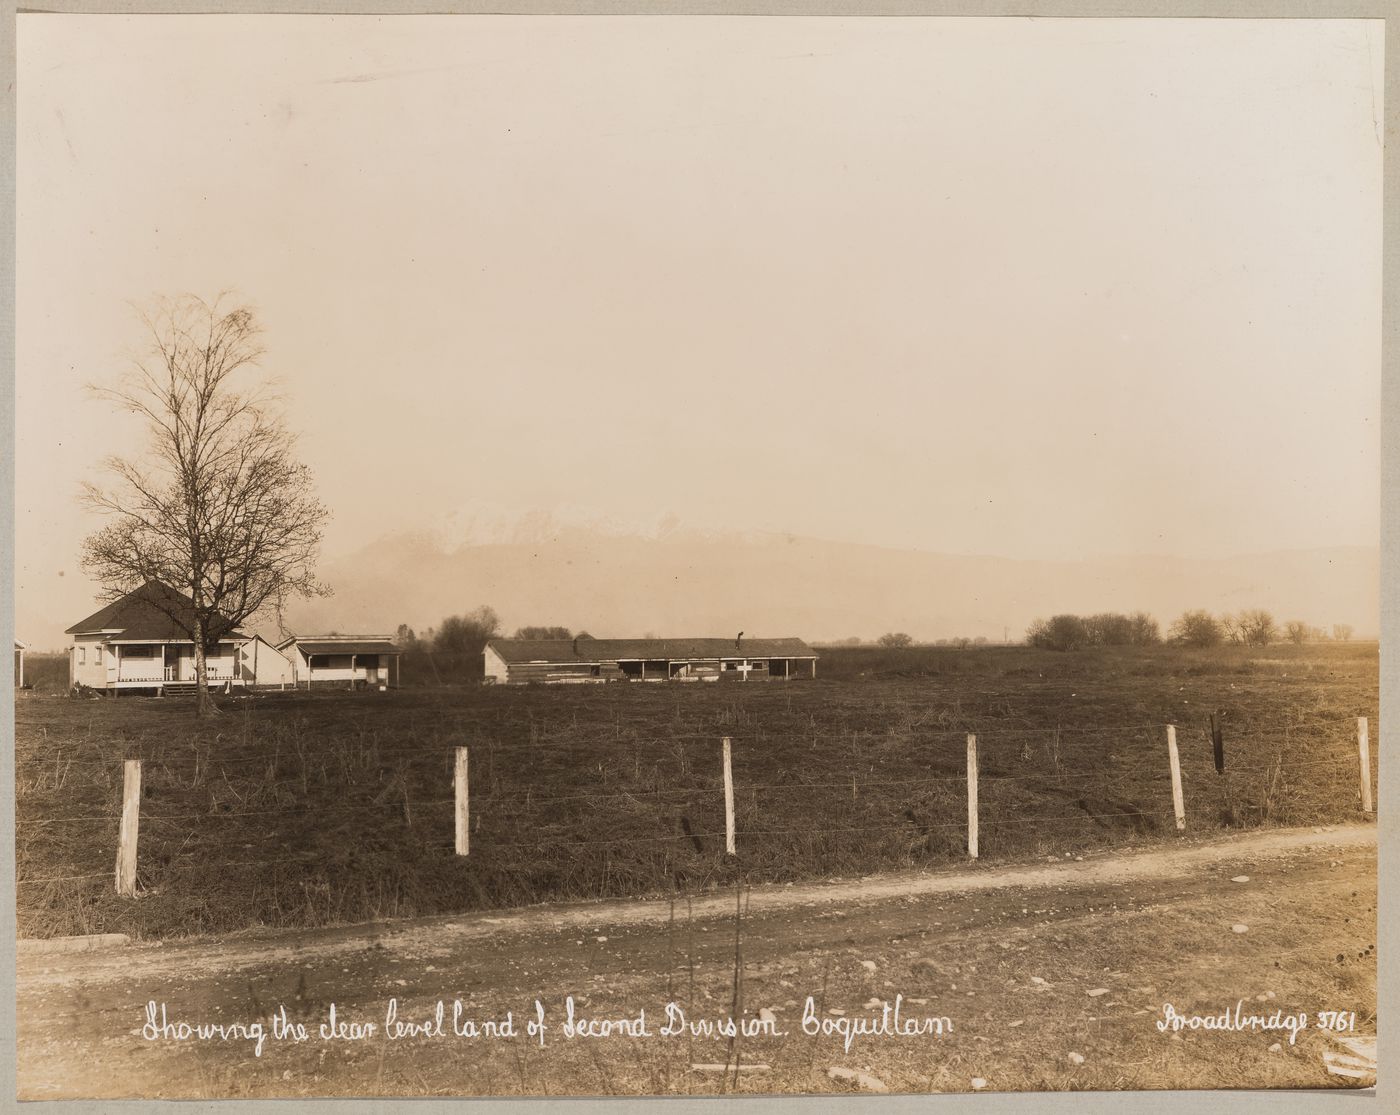 View of a farmhouse [?] on land designated for the development of the Second Division, the industrial center of Coquitlam (now Port Coquitlam), British Columbia